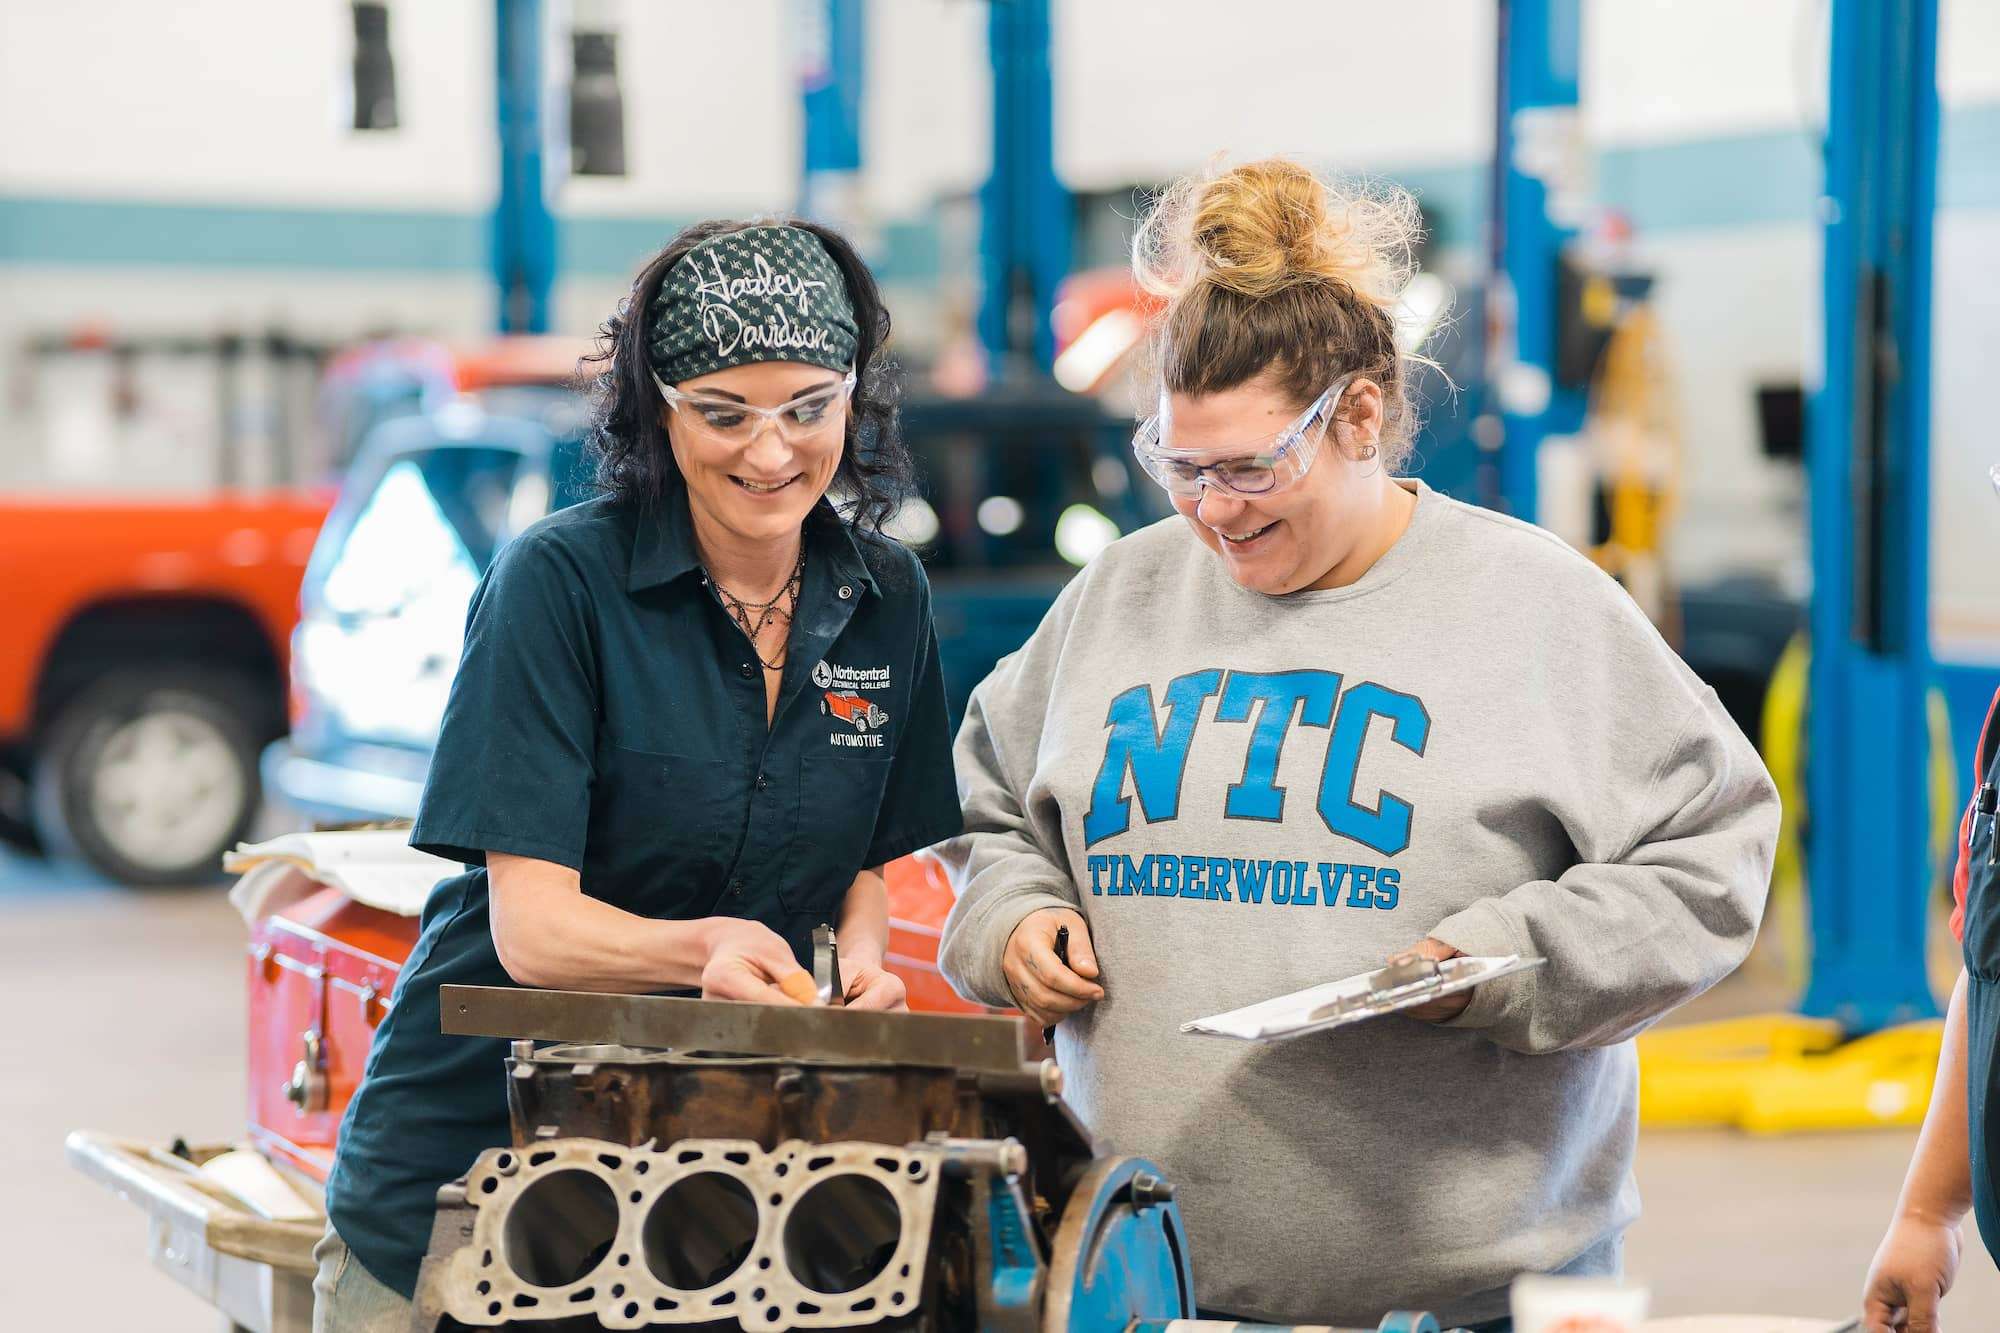 An instructor and automotive student collaborating to take notes on the status of a 6 cylinder engine block.